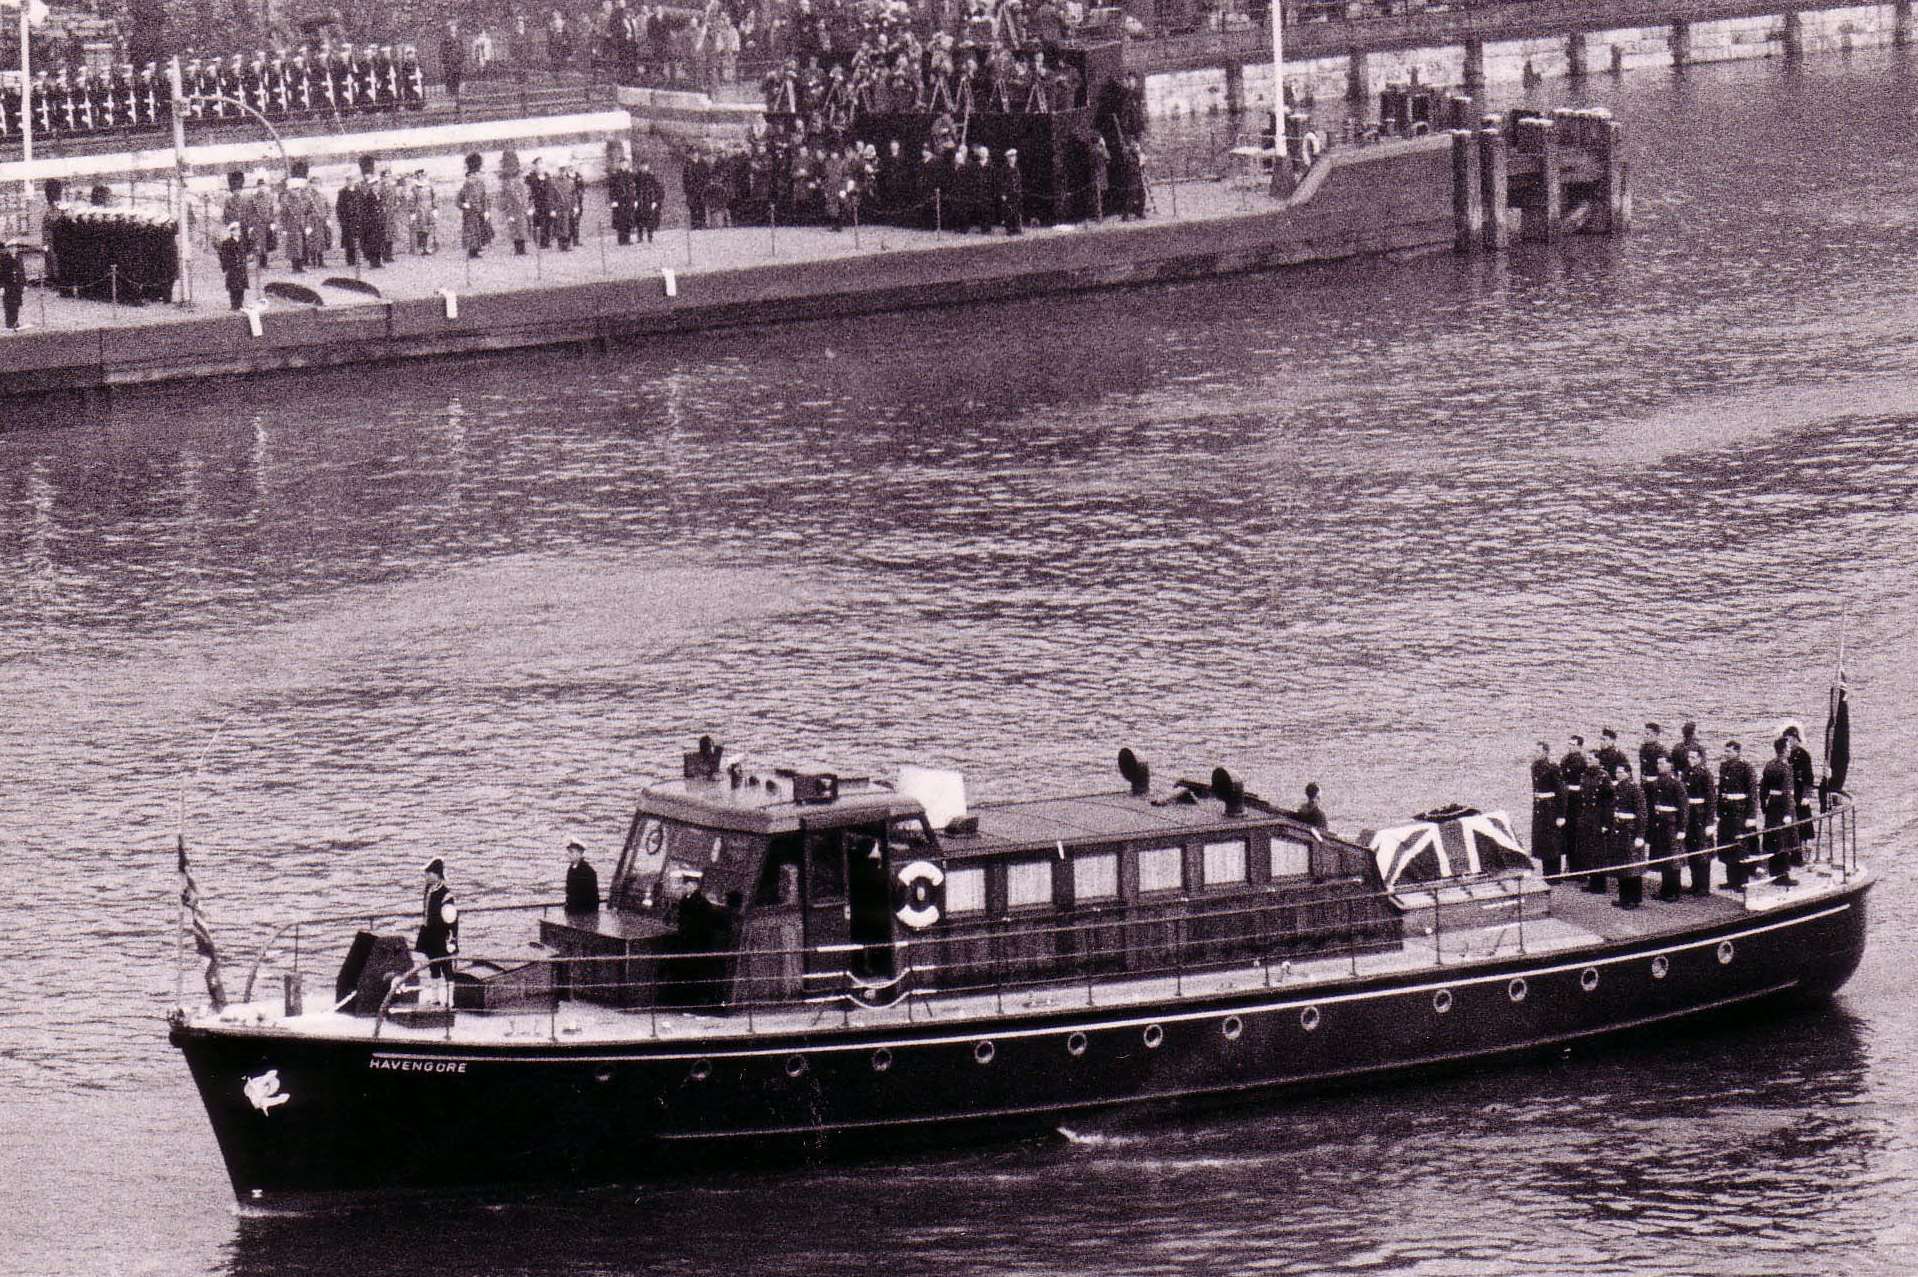 The coffin of Sir Winston Churchill draped with the Union Flag on Havengore's deck in 1965